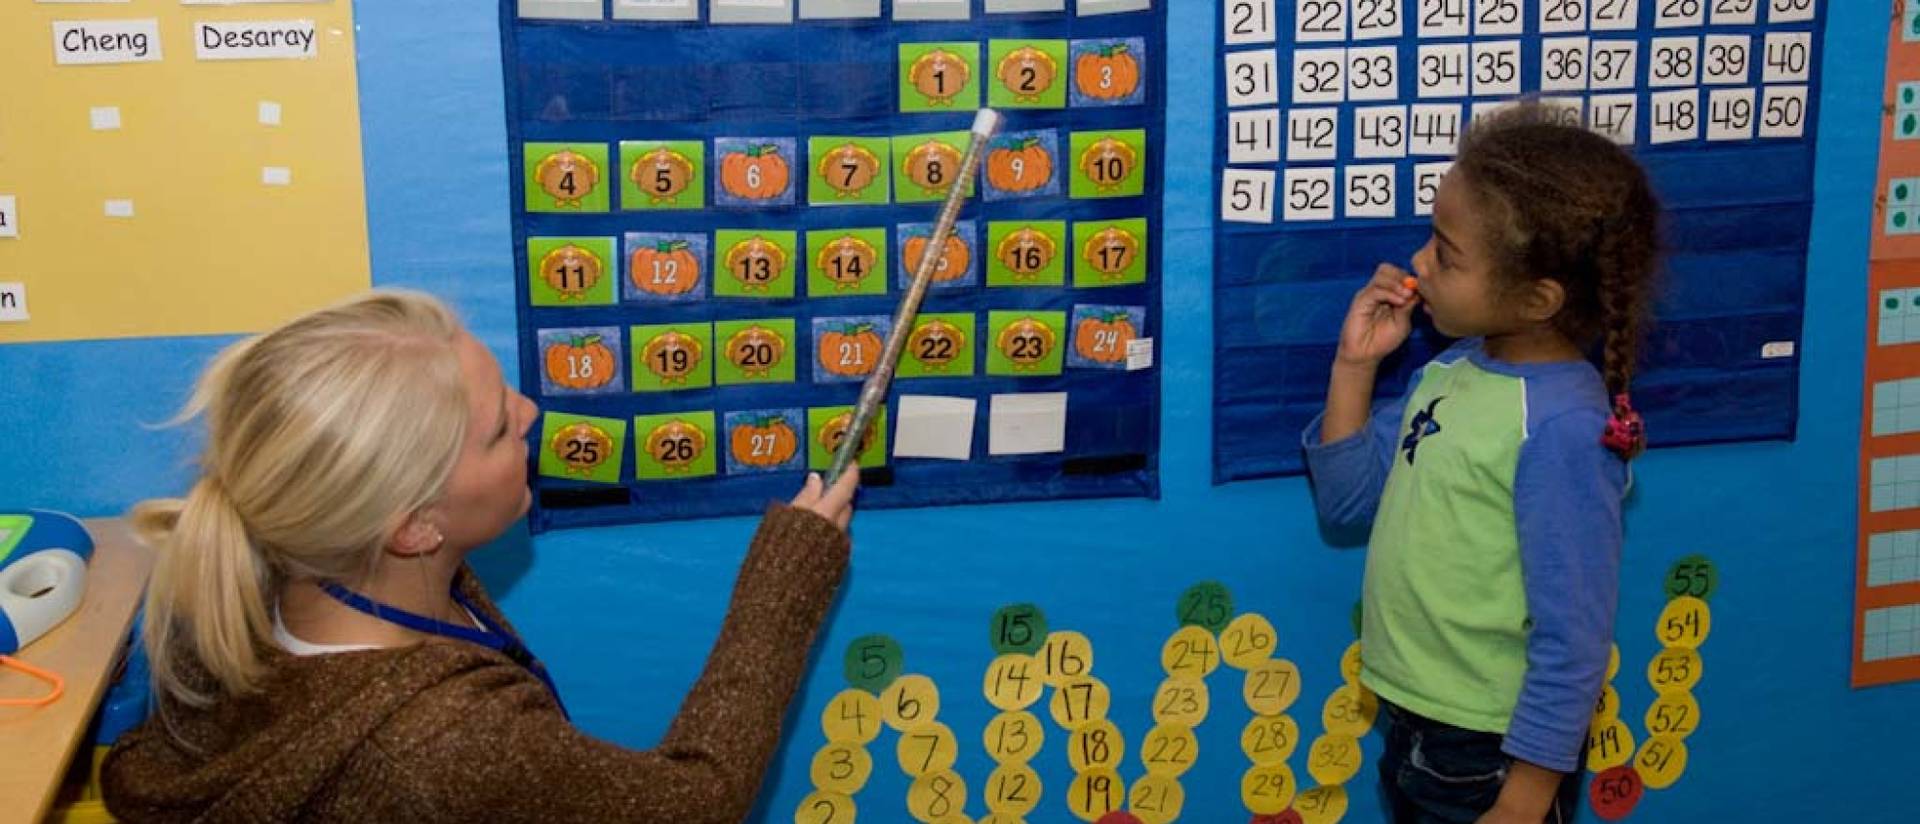 Student teaching an elementary child numbers